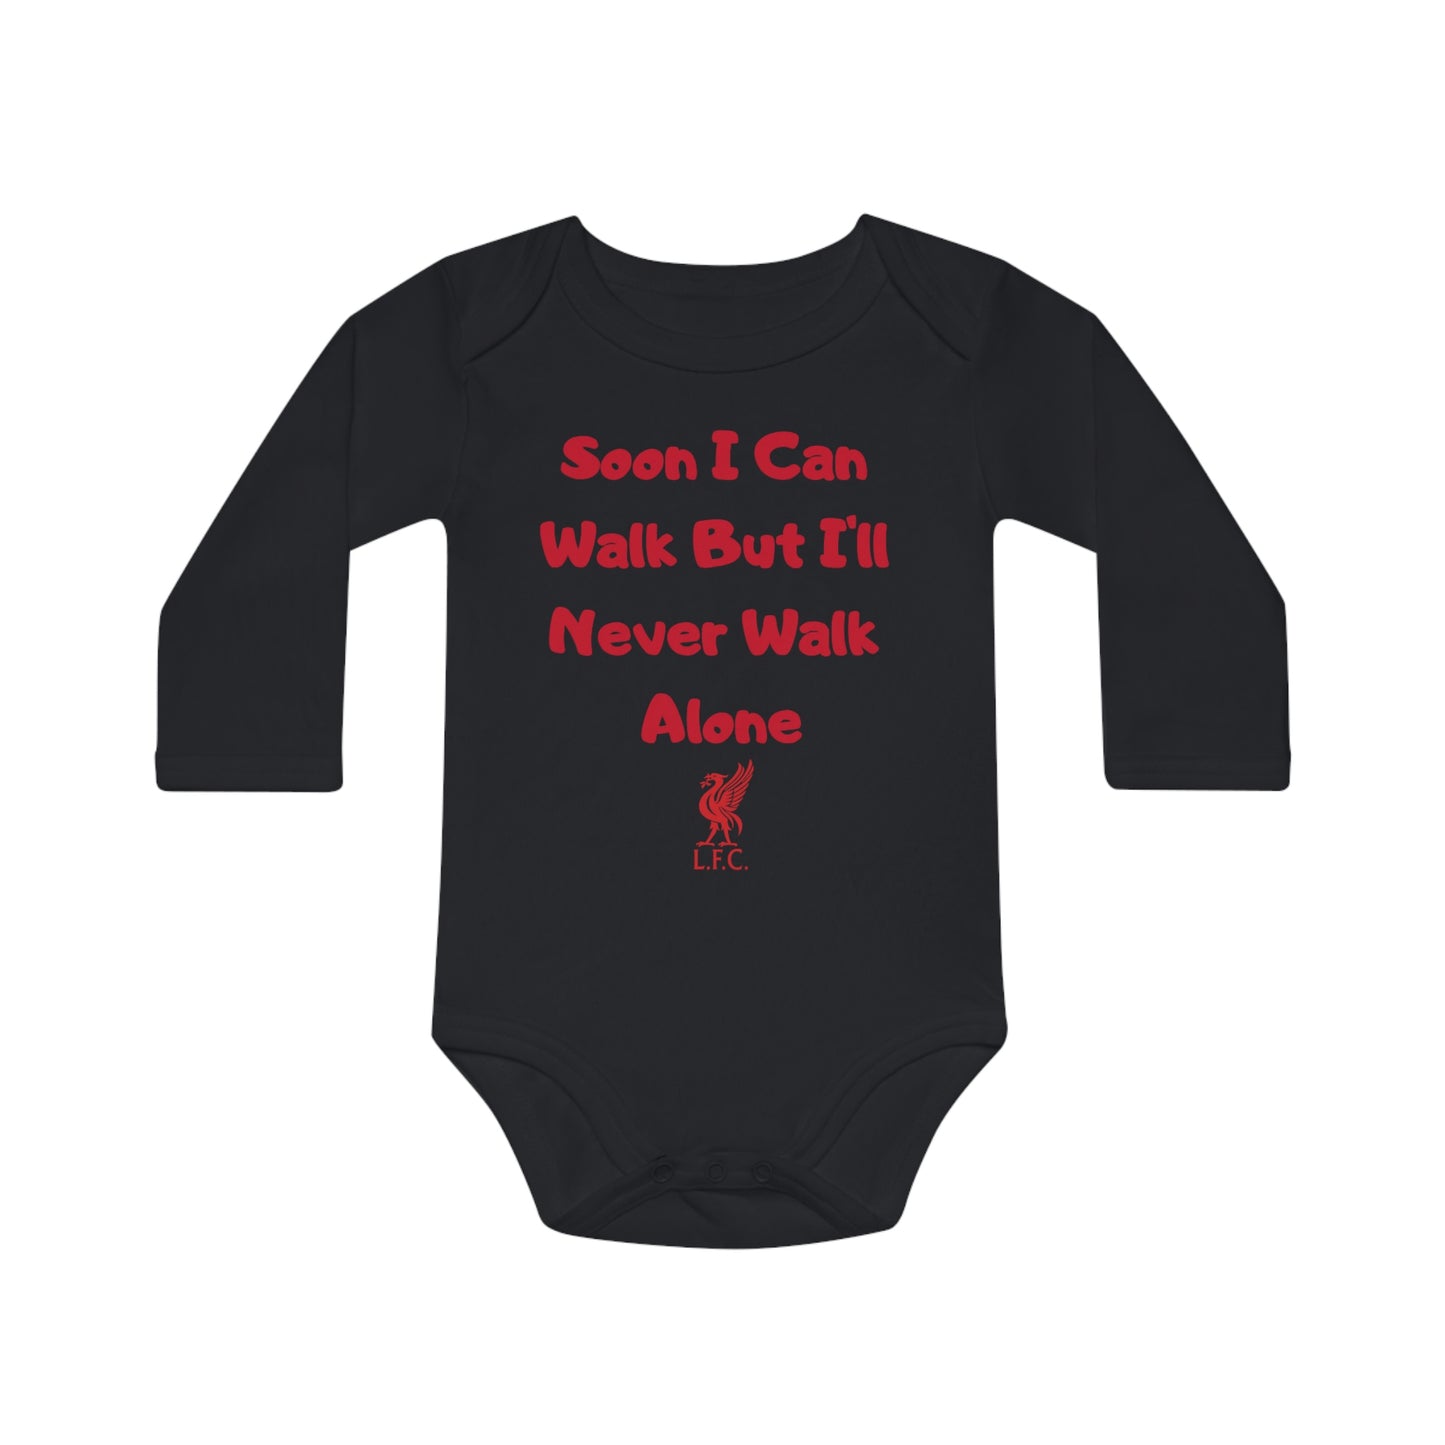 Soon I Can Walk But I'll Never Walk Alone - Liverpool Supporter Body